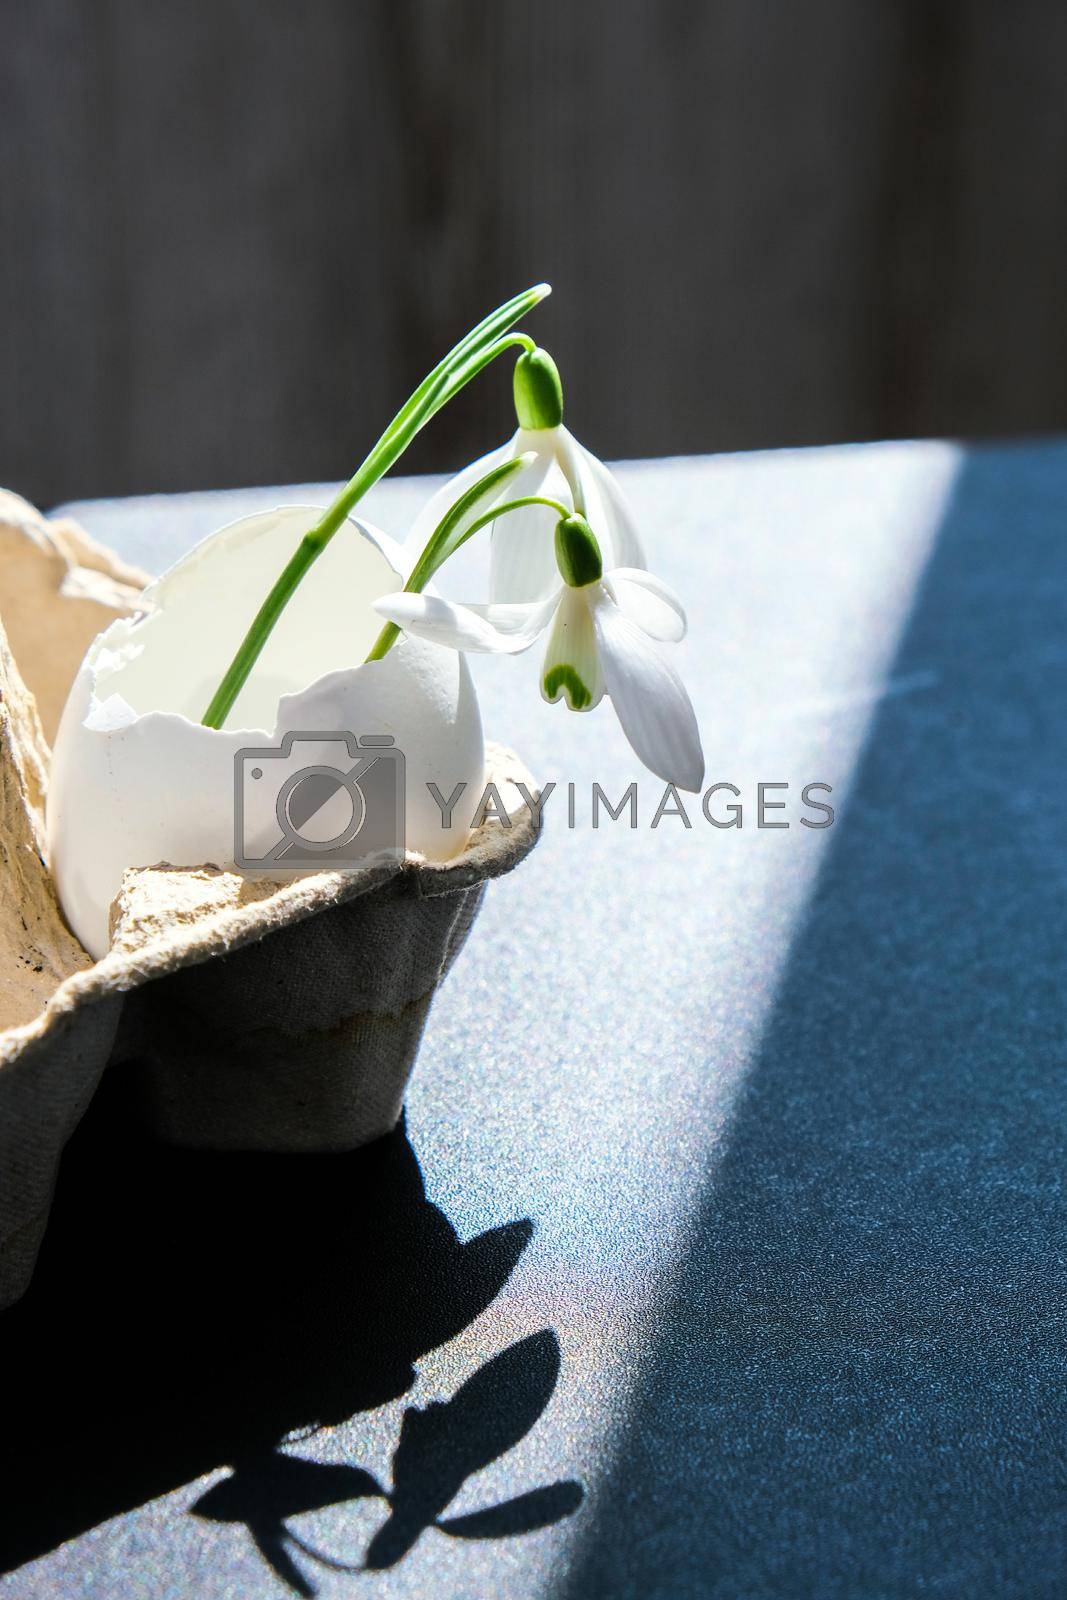 Royalty free image of Creative minimal Easter and spring time concept with snowdrop in the white eggshell on dark background. Sustainable lifestyle. by anna_stasiia